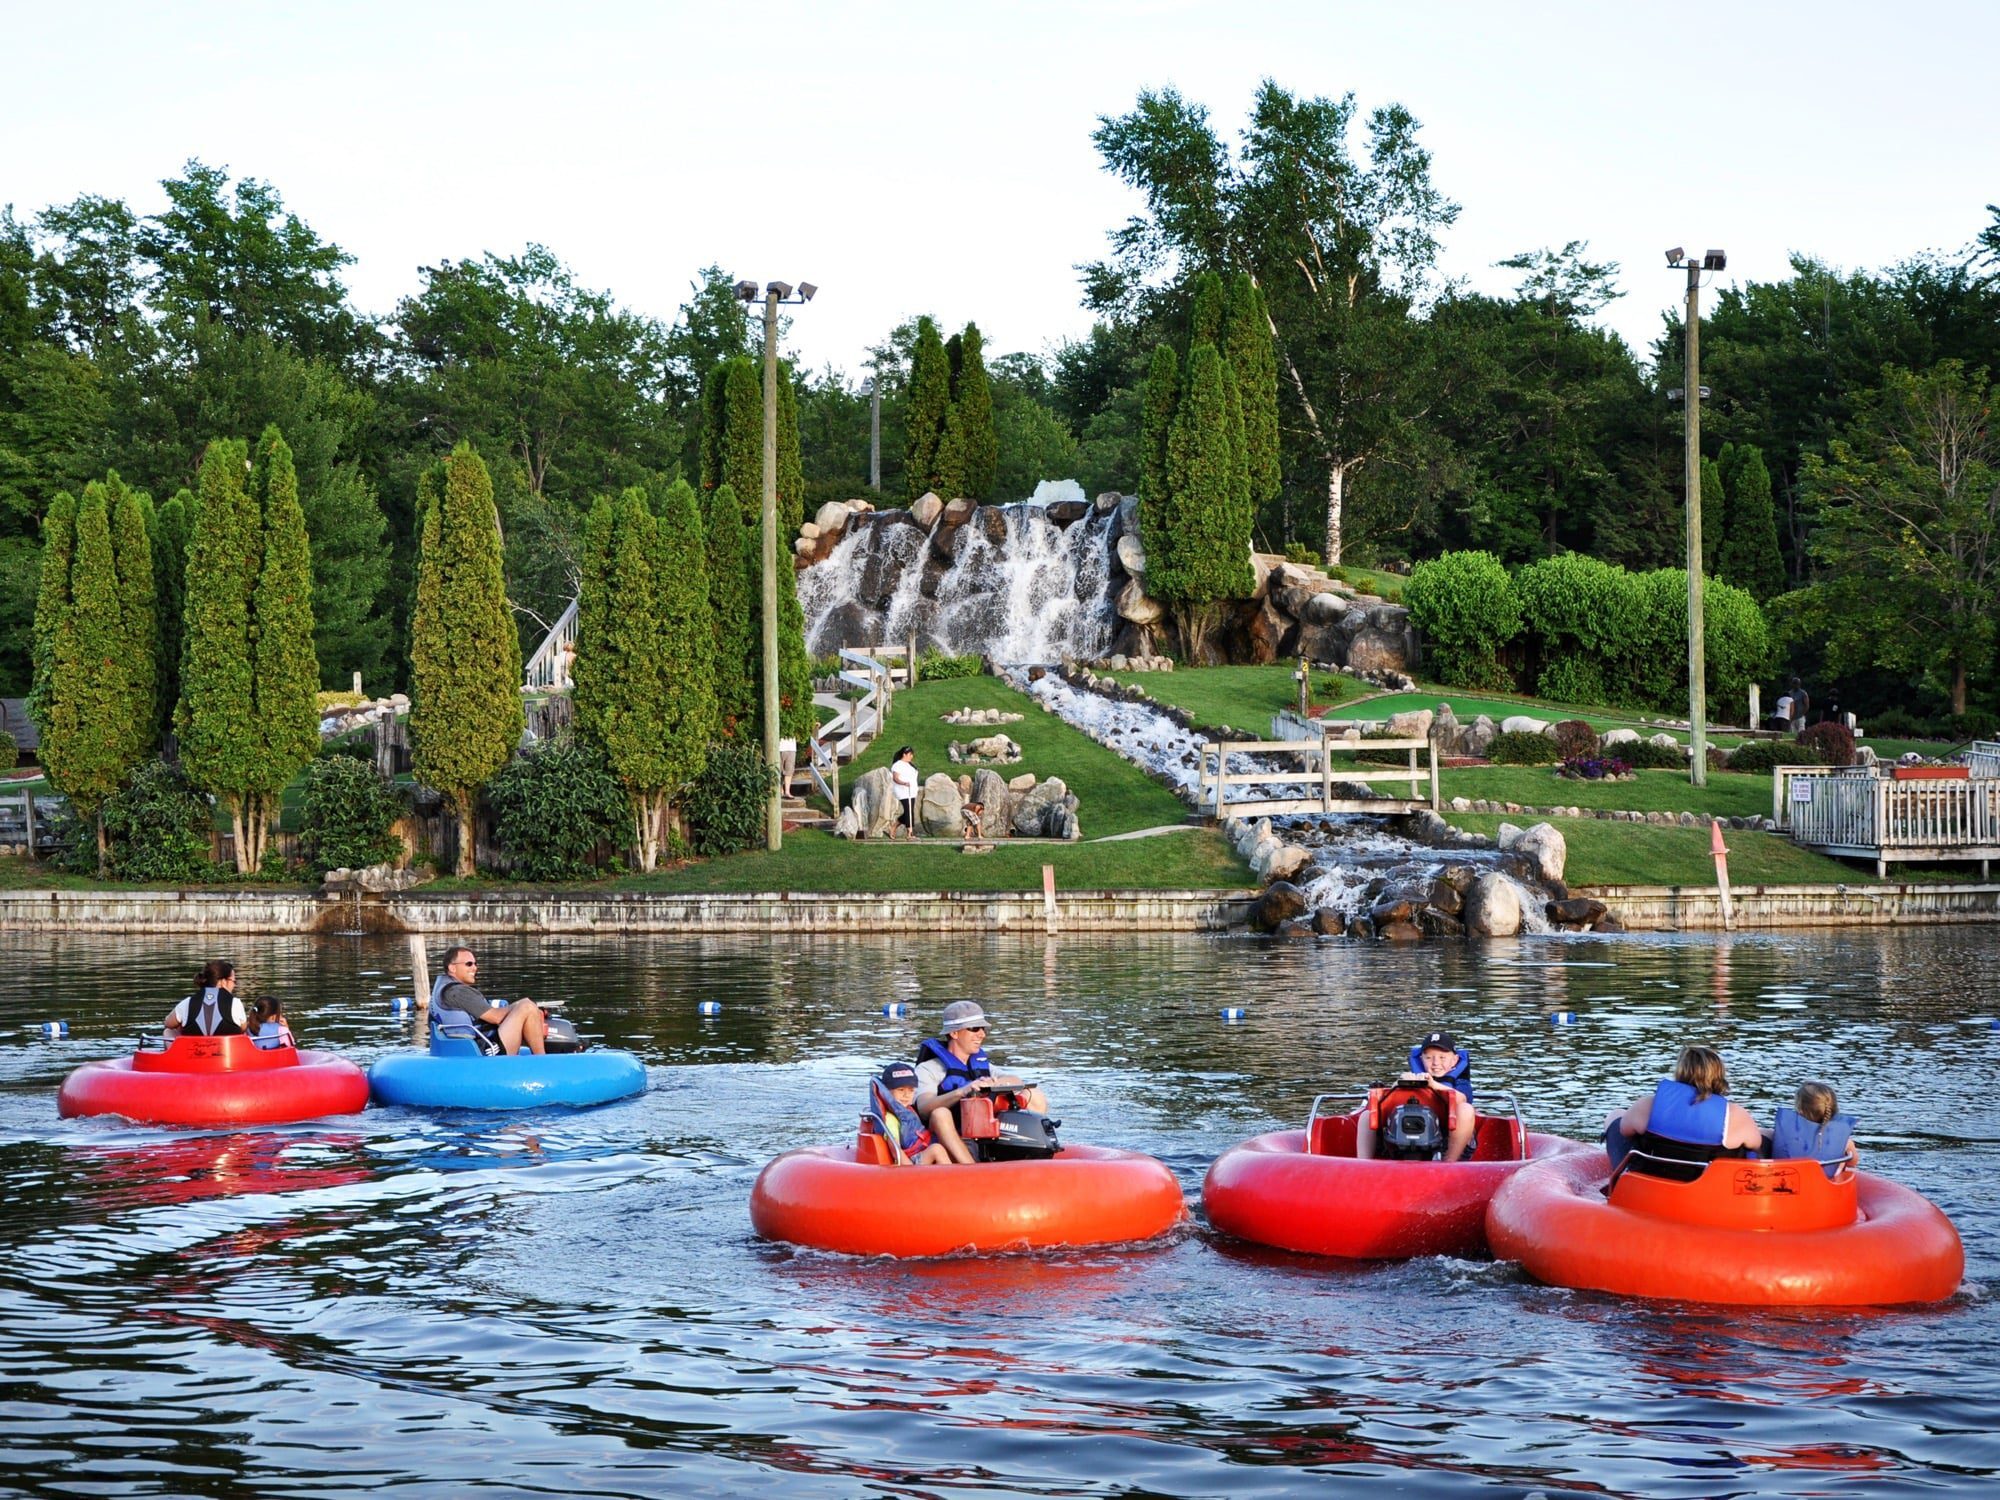 An image of bumper boats in a small pond. 